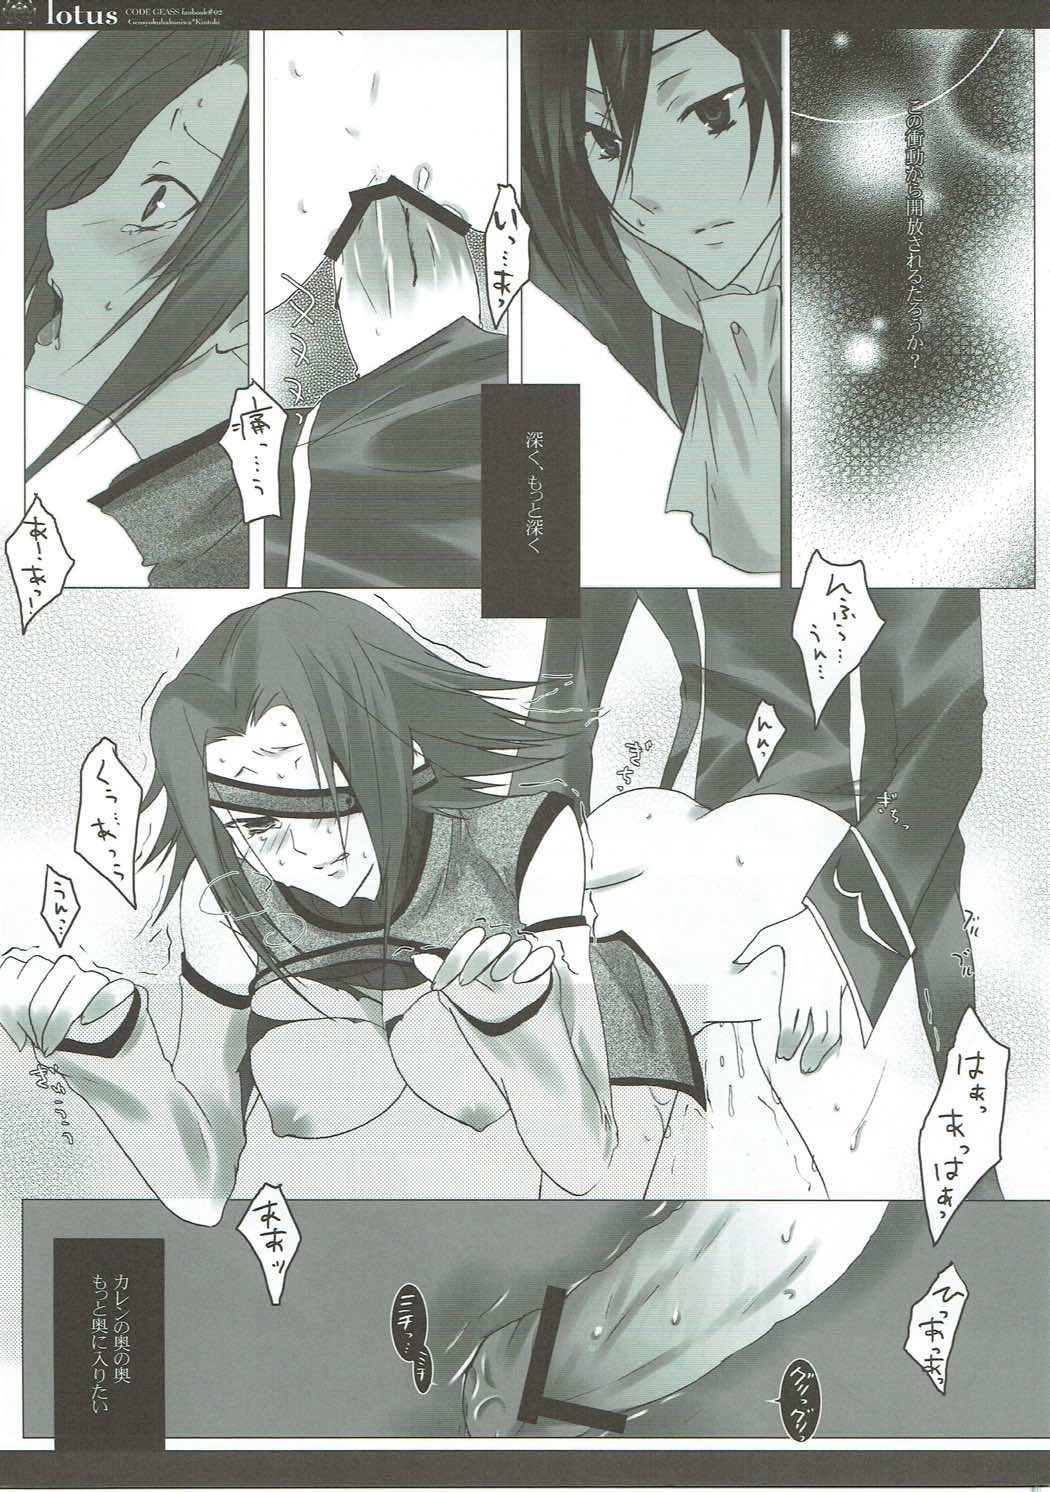 Nylons lotus - Code geass Audition - Page 6